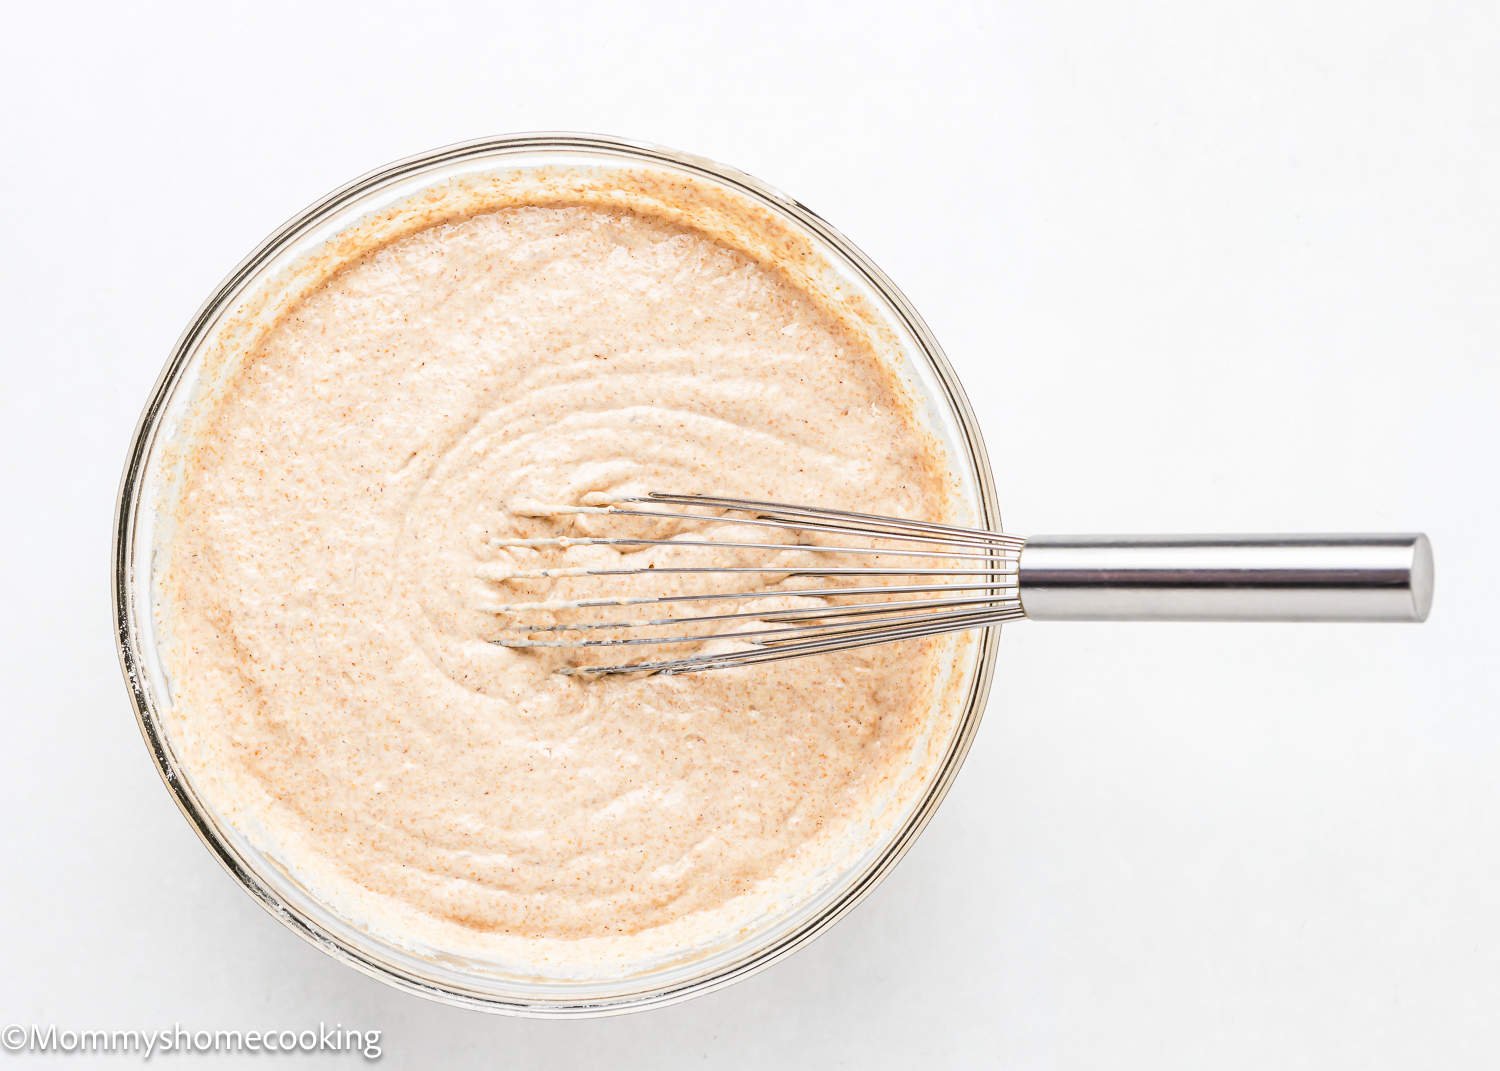 egg-free Whole Wheat Pancakes batter in a bowl with a wisk.